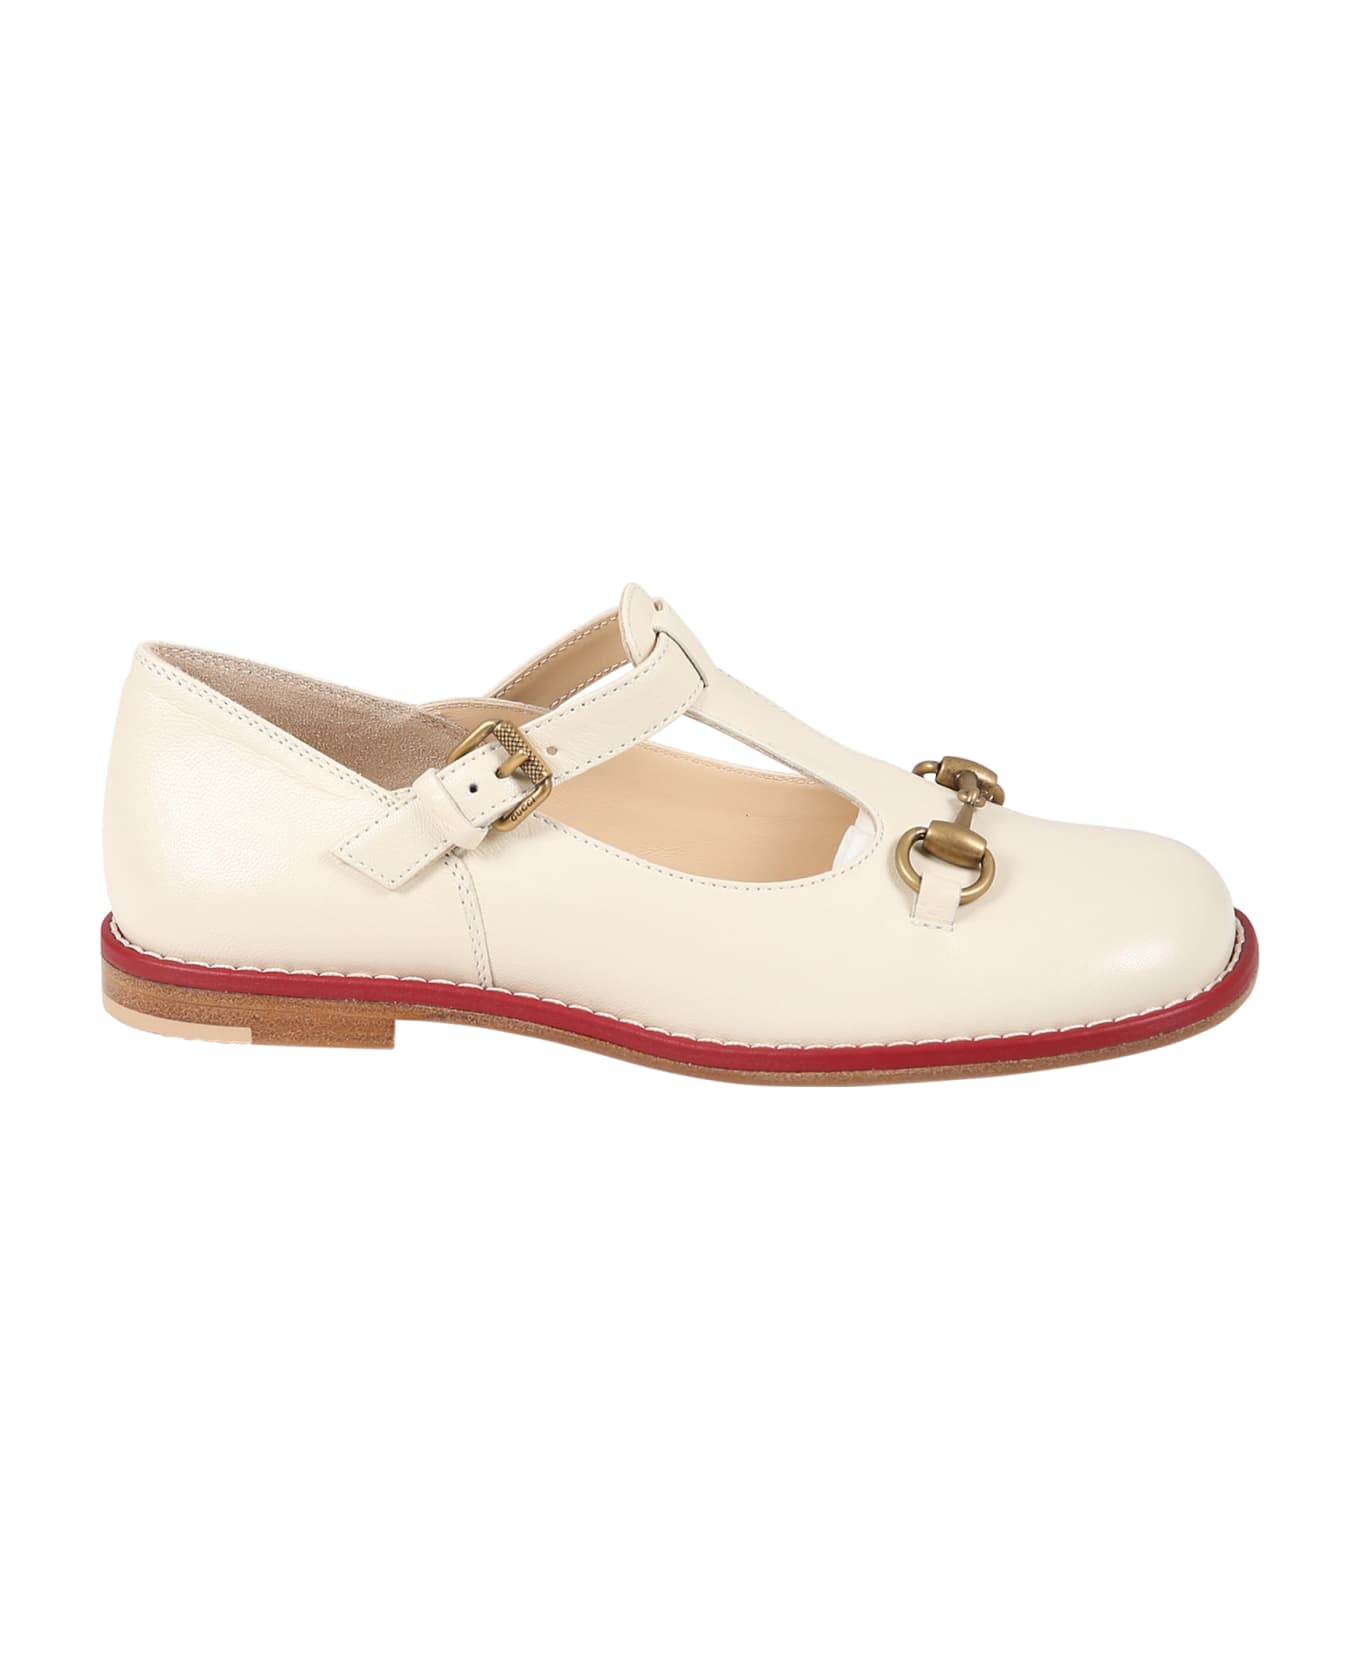 Gucci Ivory Ballet Flats For Girl With Iconic Horsebit - White